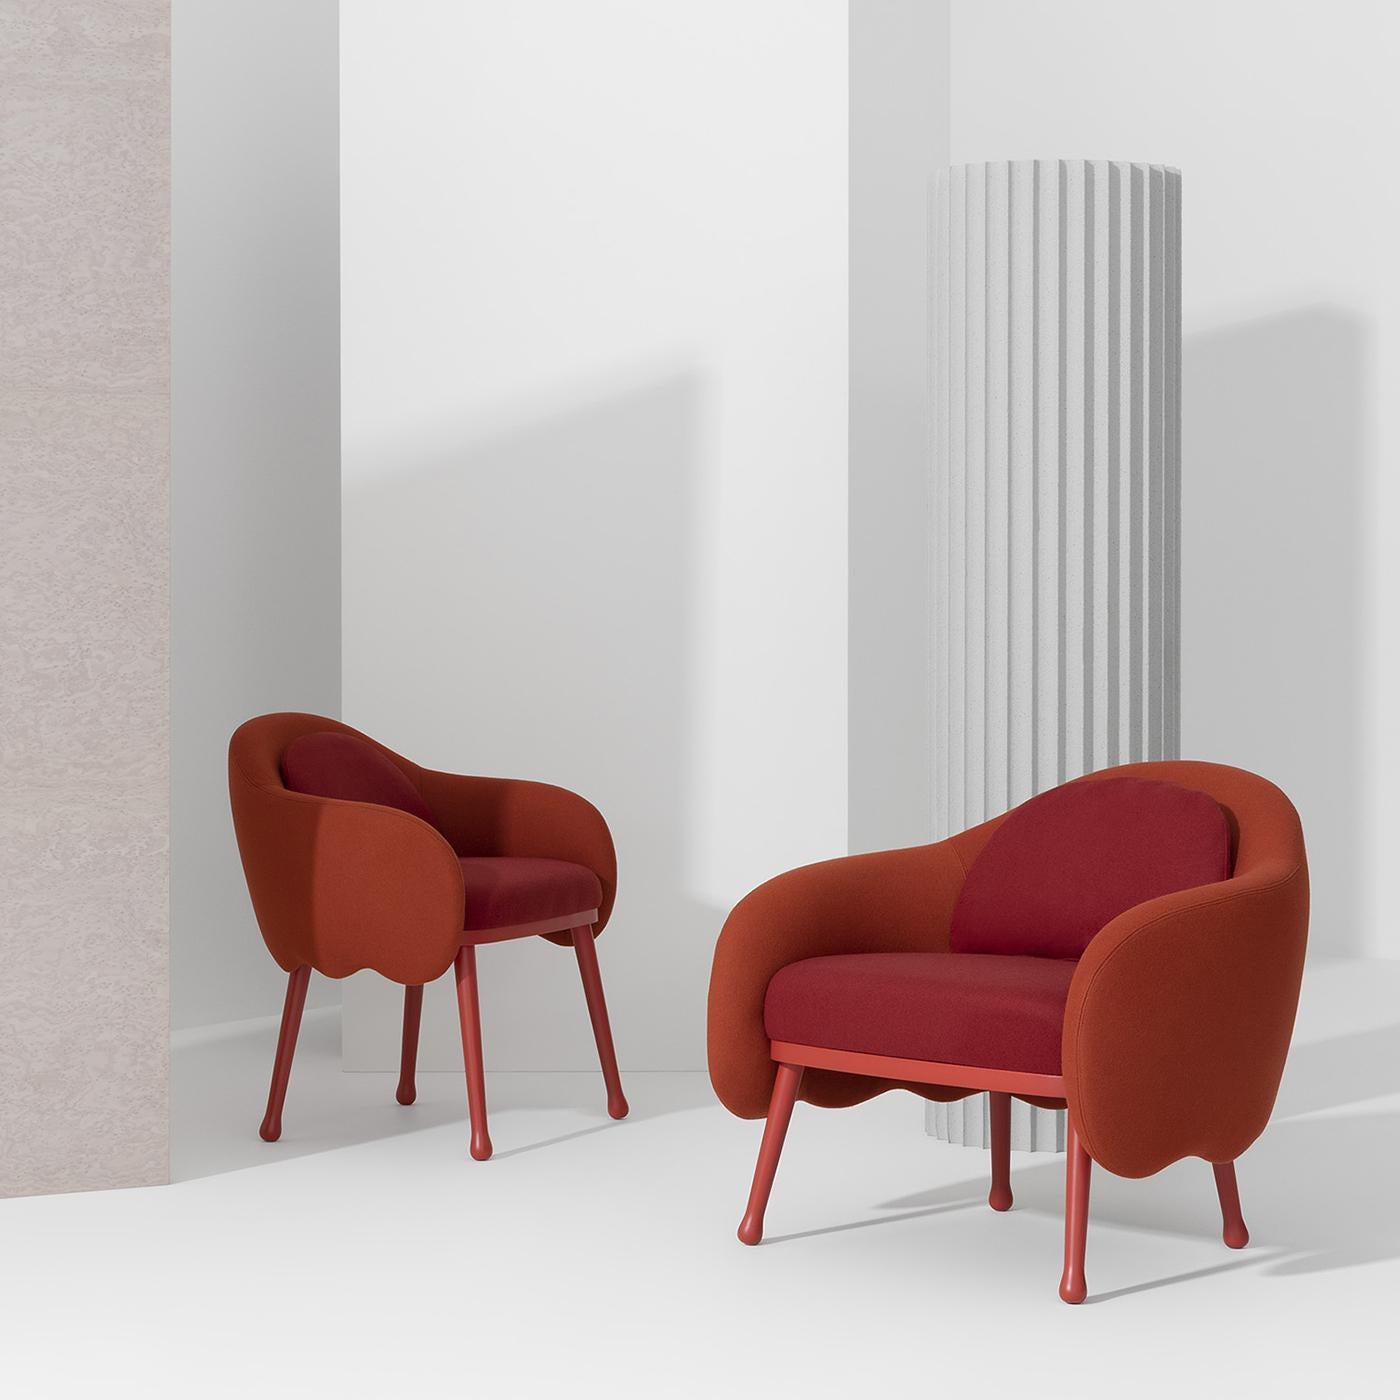 Characterized by an exquisite combination of warm hues, this armchair features two different upholsteries: a red fabric covering the seat and back cushions, and an orange one for the waved backrest and armrests. An exquisite modern design by